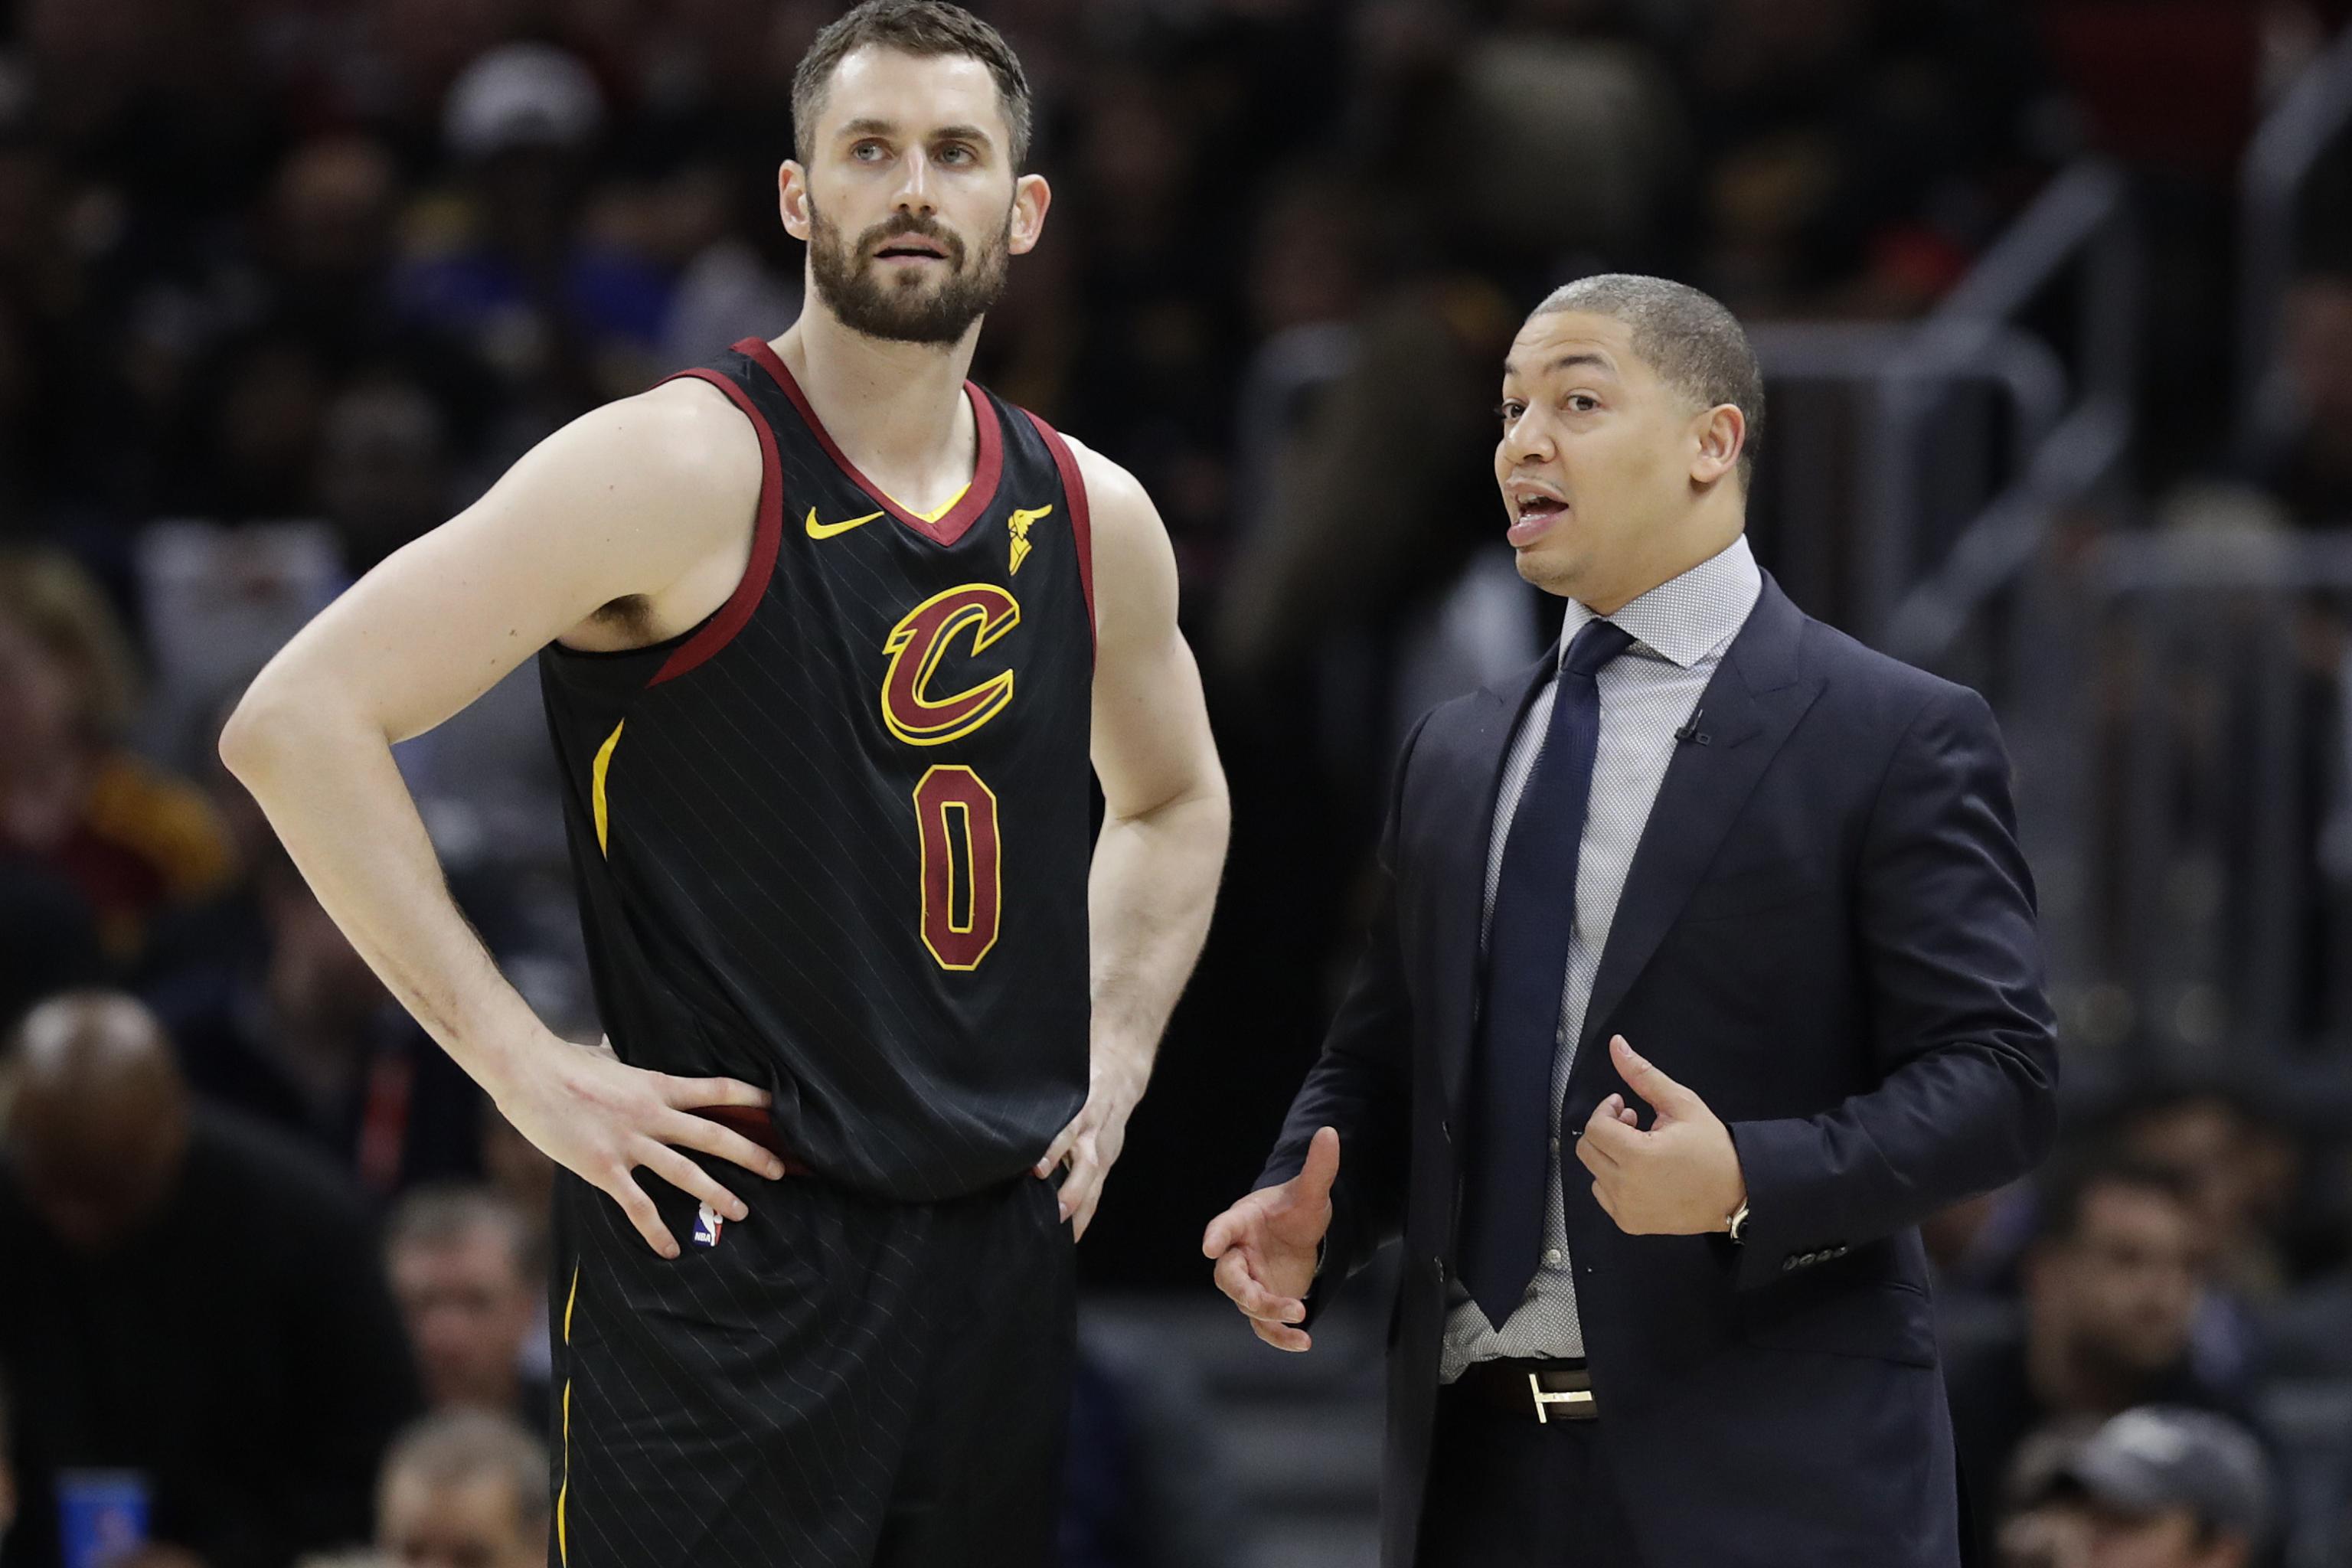 Nba Trade Rumors Buzz On Kevin Love David Nwaba And More Bleacher Report Latest News Videos And Highlights